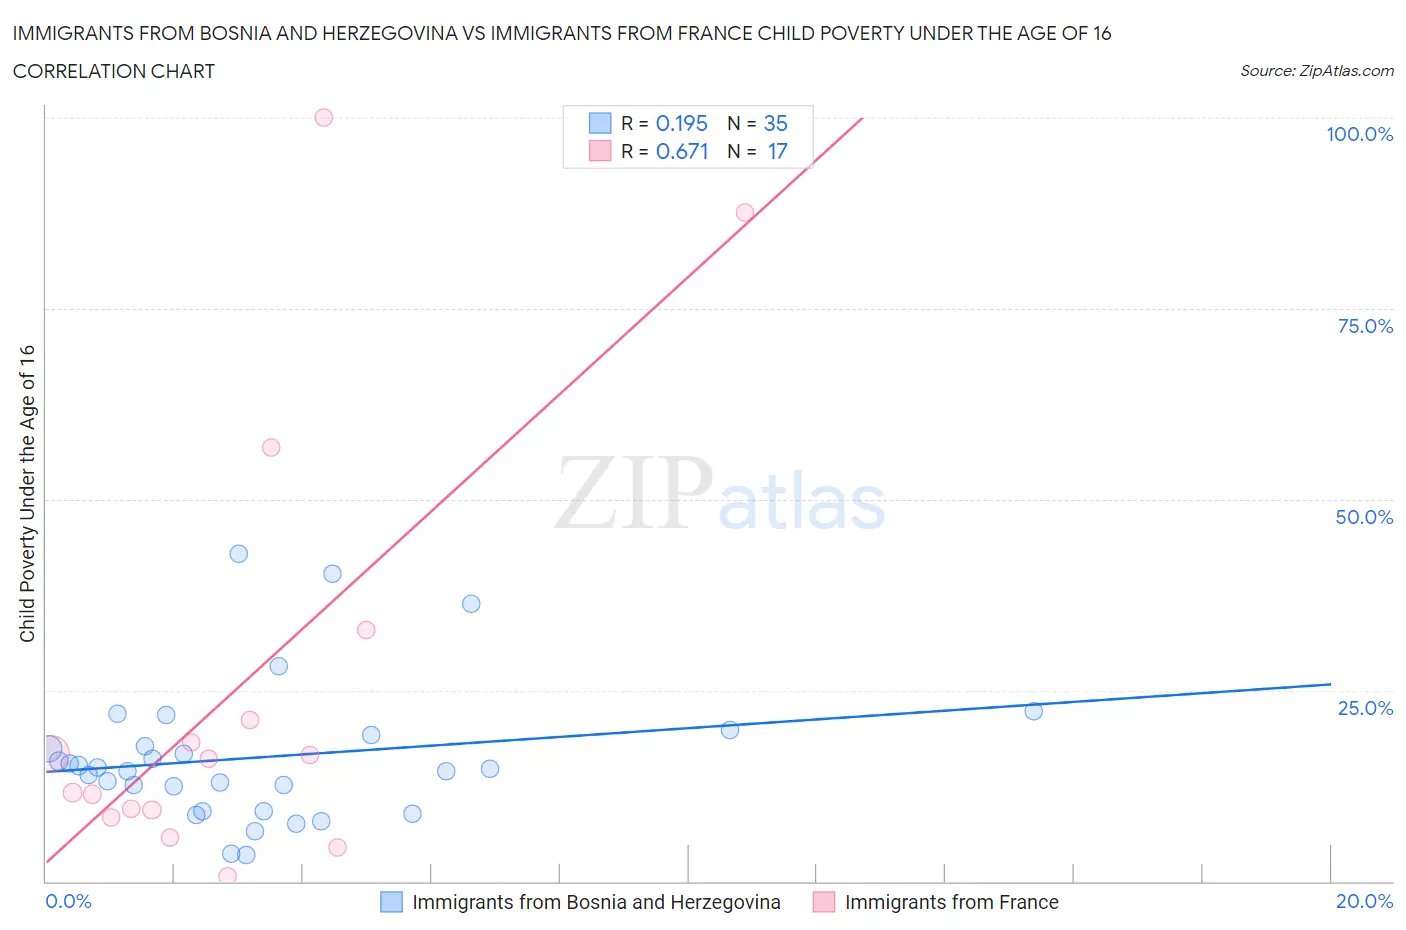 Immigrants from Bosnia and Herzegovina vs Immigrants from France Child Poverty Under the Age of 16